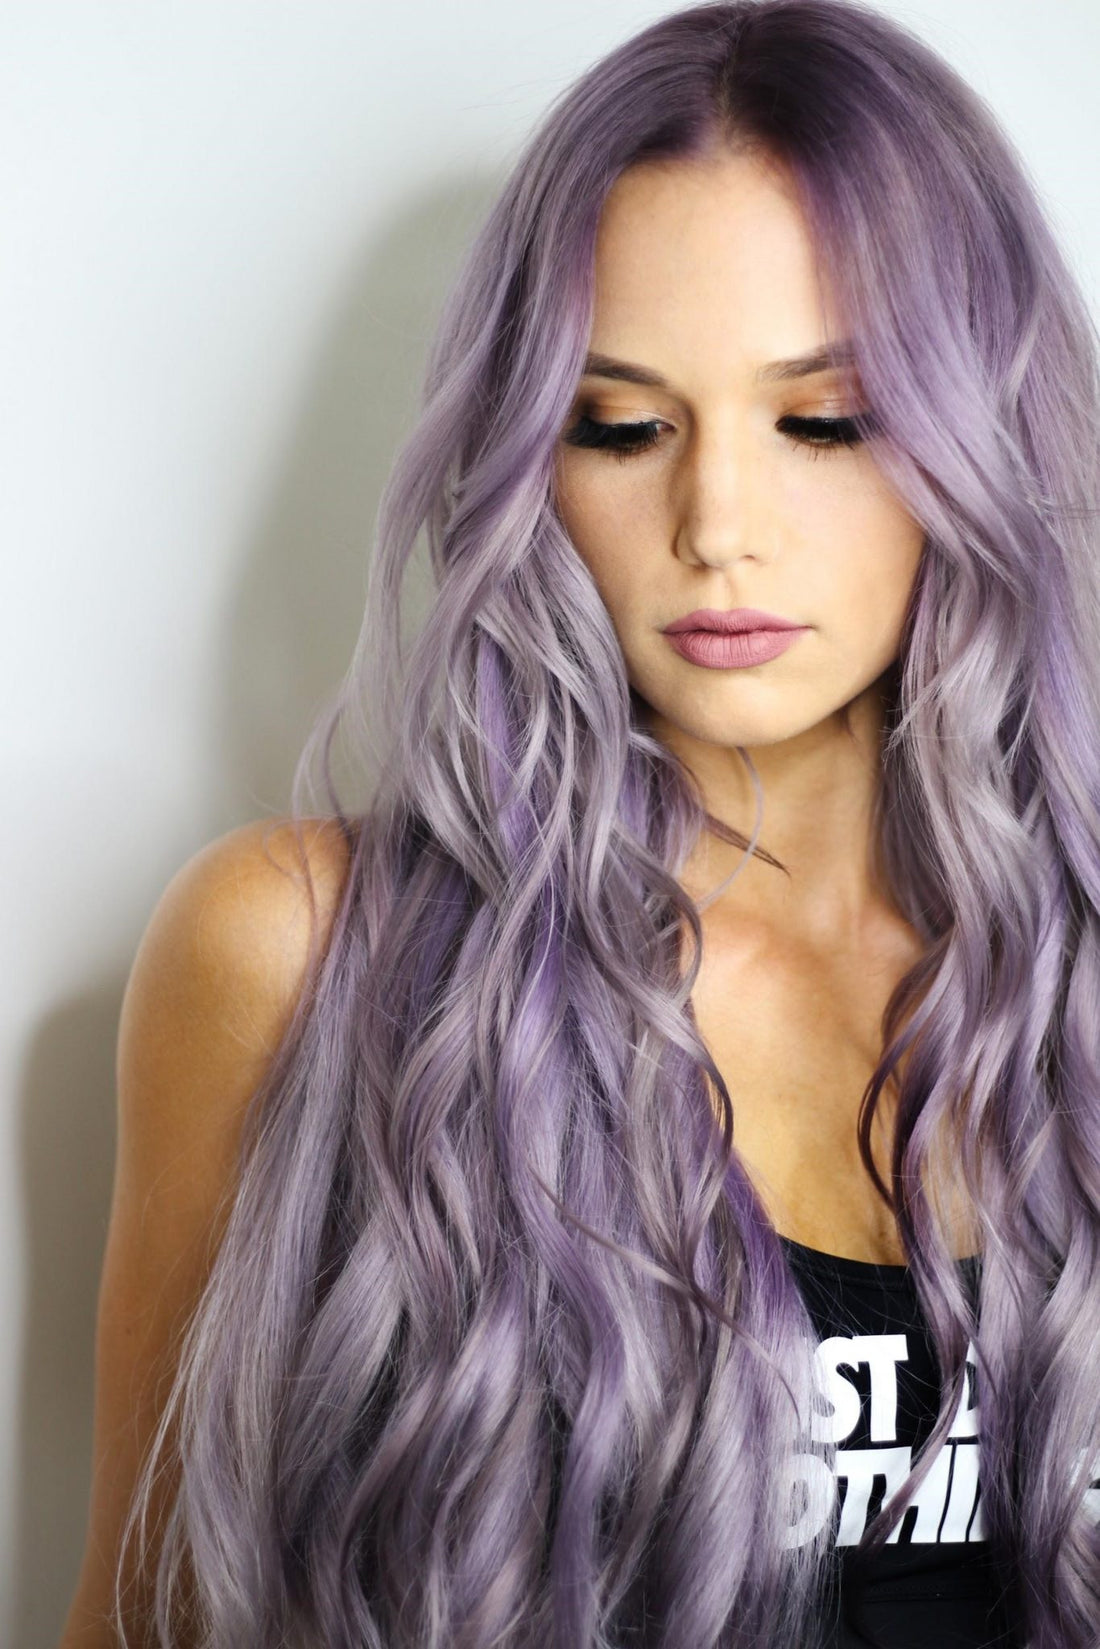 HAIR COLORS YOU SHOULD ASK FOR IN 2020